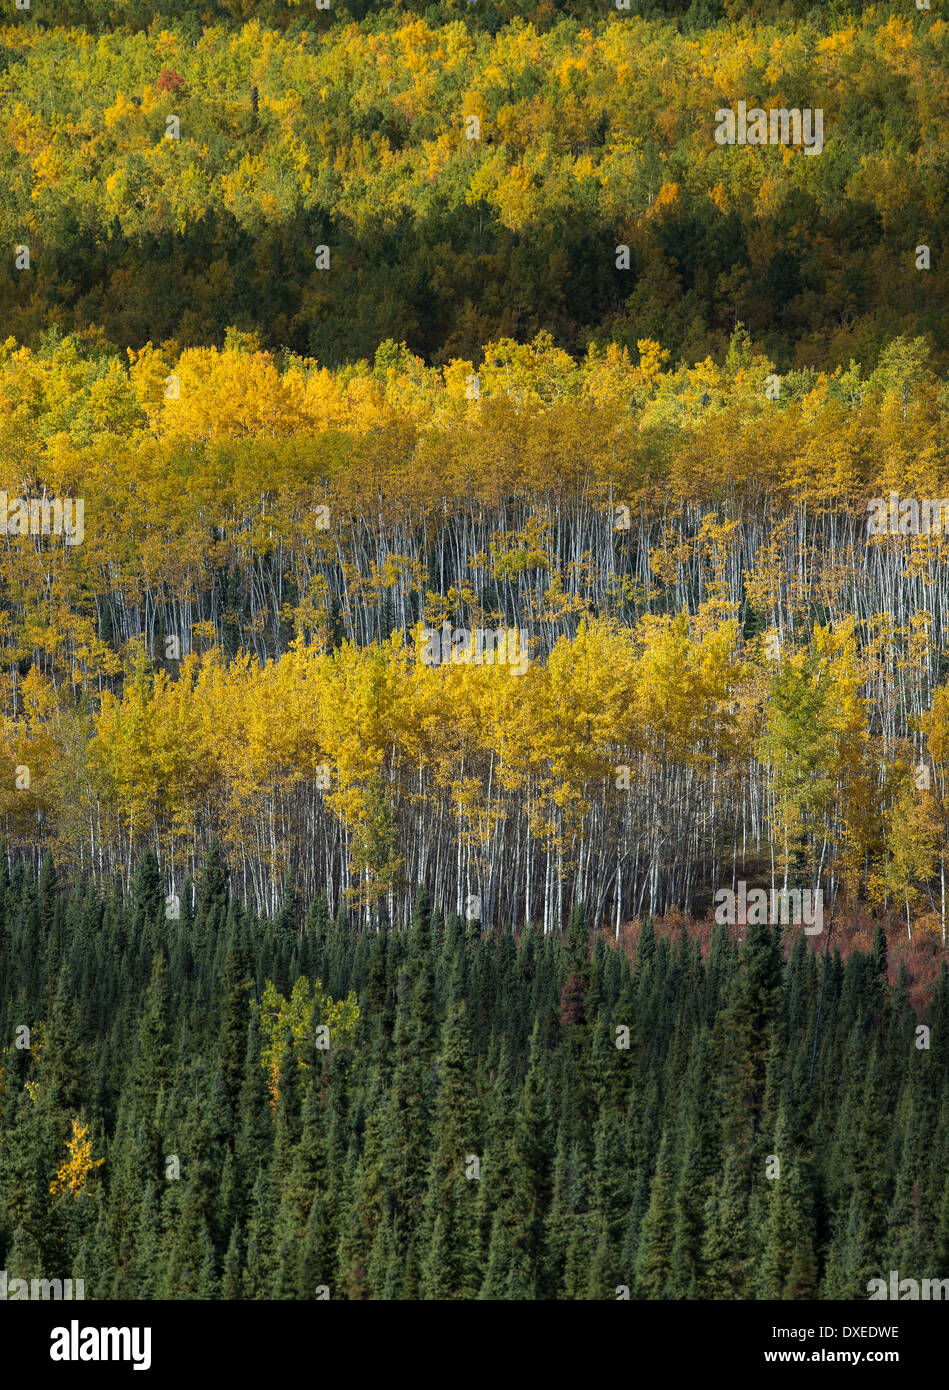 Couleurs d'automne nr Pelly Crossing, Yukon, Canada Banque D'Images